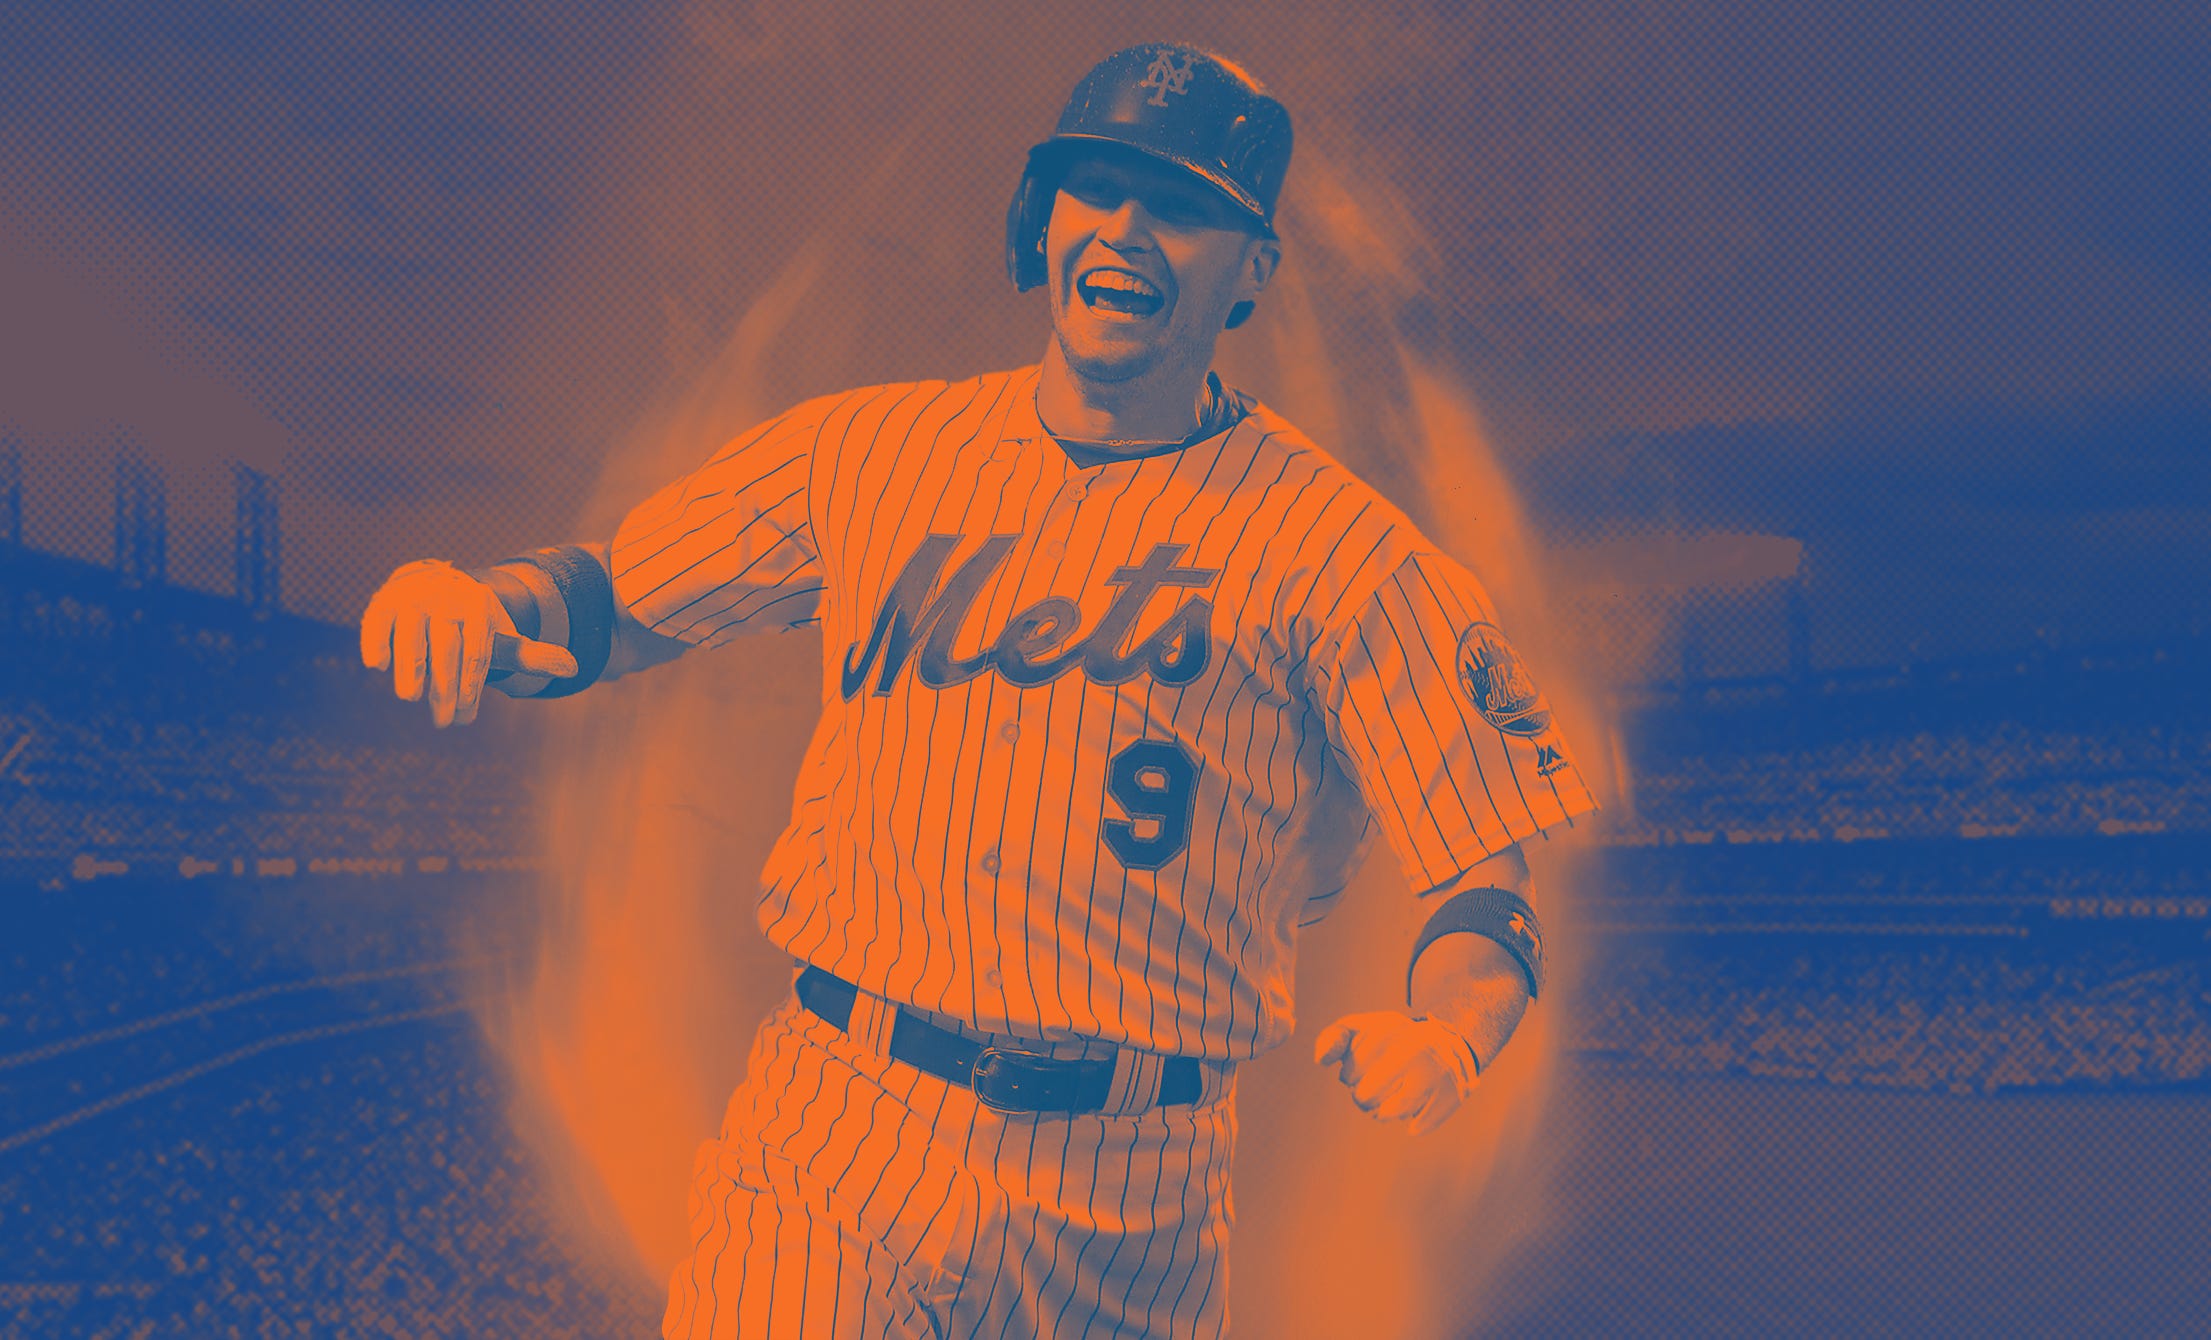 Mets re-sign Brandon Nimmo to 8-year, $162 million deal